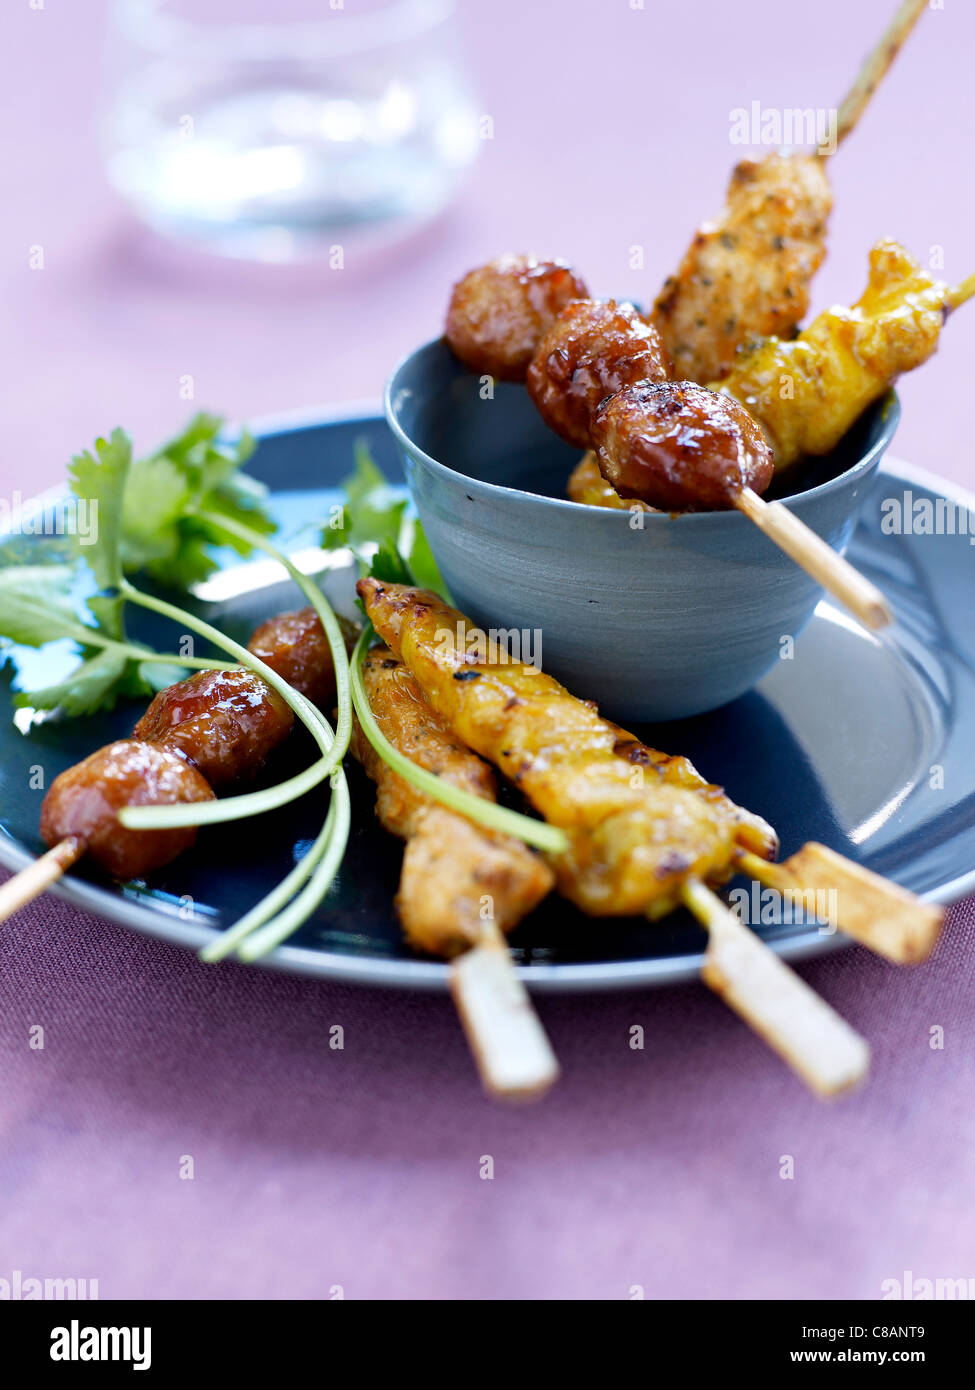 Spicy chicken and beef brochettes Stock Photo